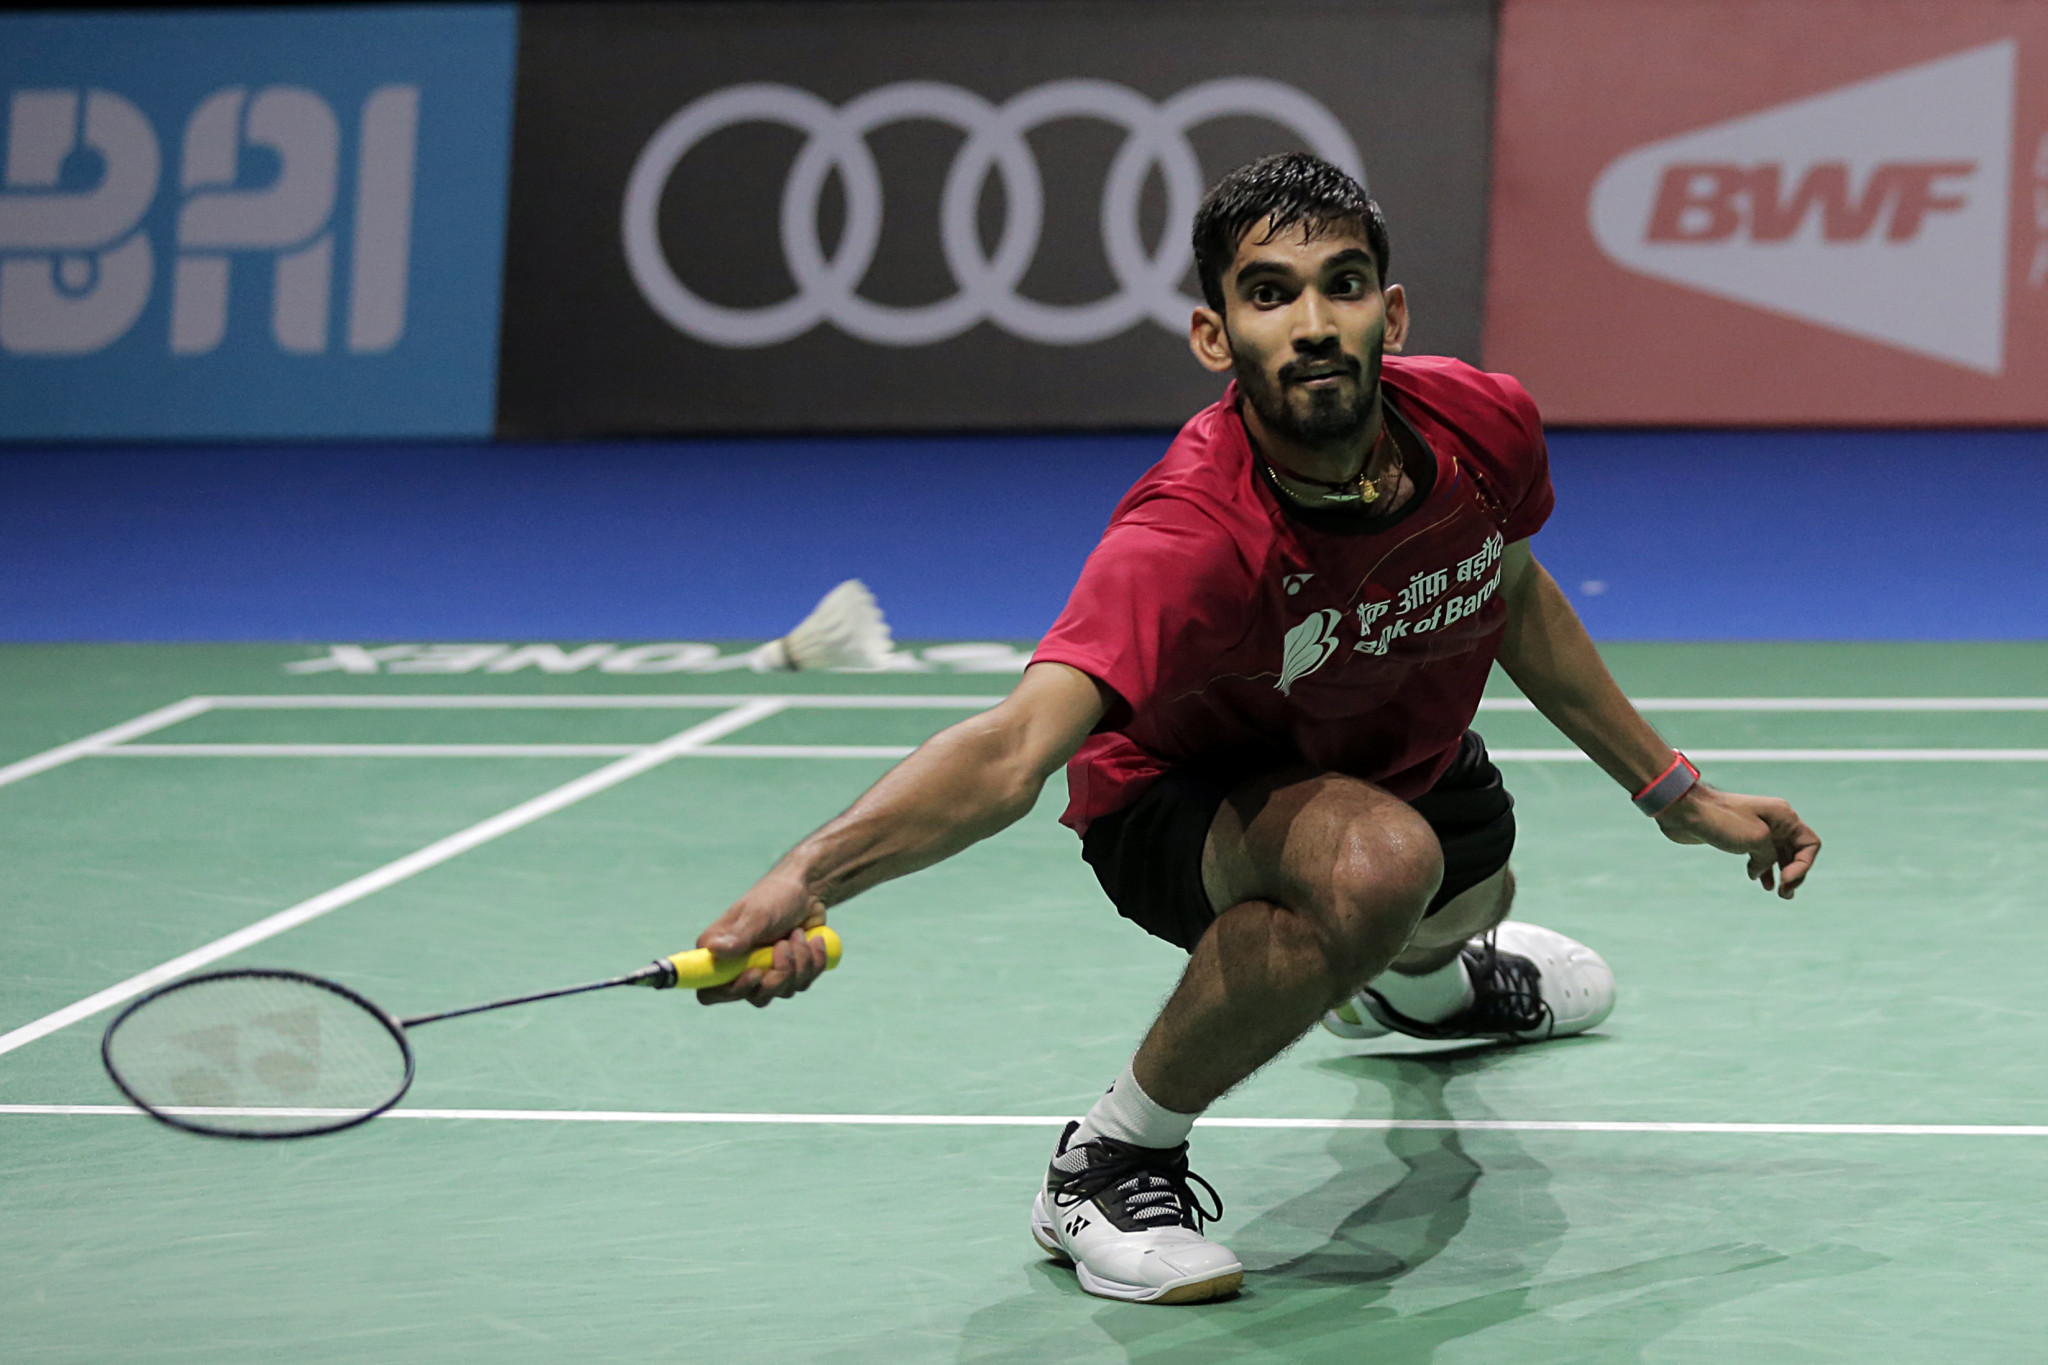 Home player Srikanth Kidambi will be hoping to win the India Open for a second time after victory in 2015 ©Getty Images